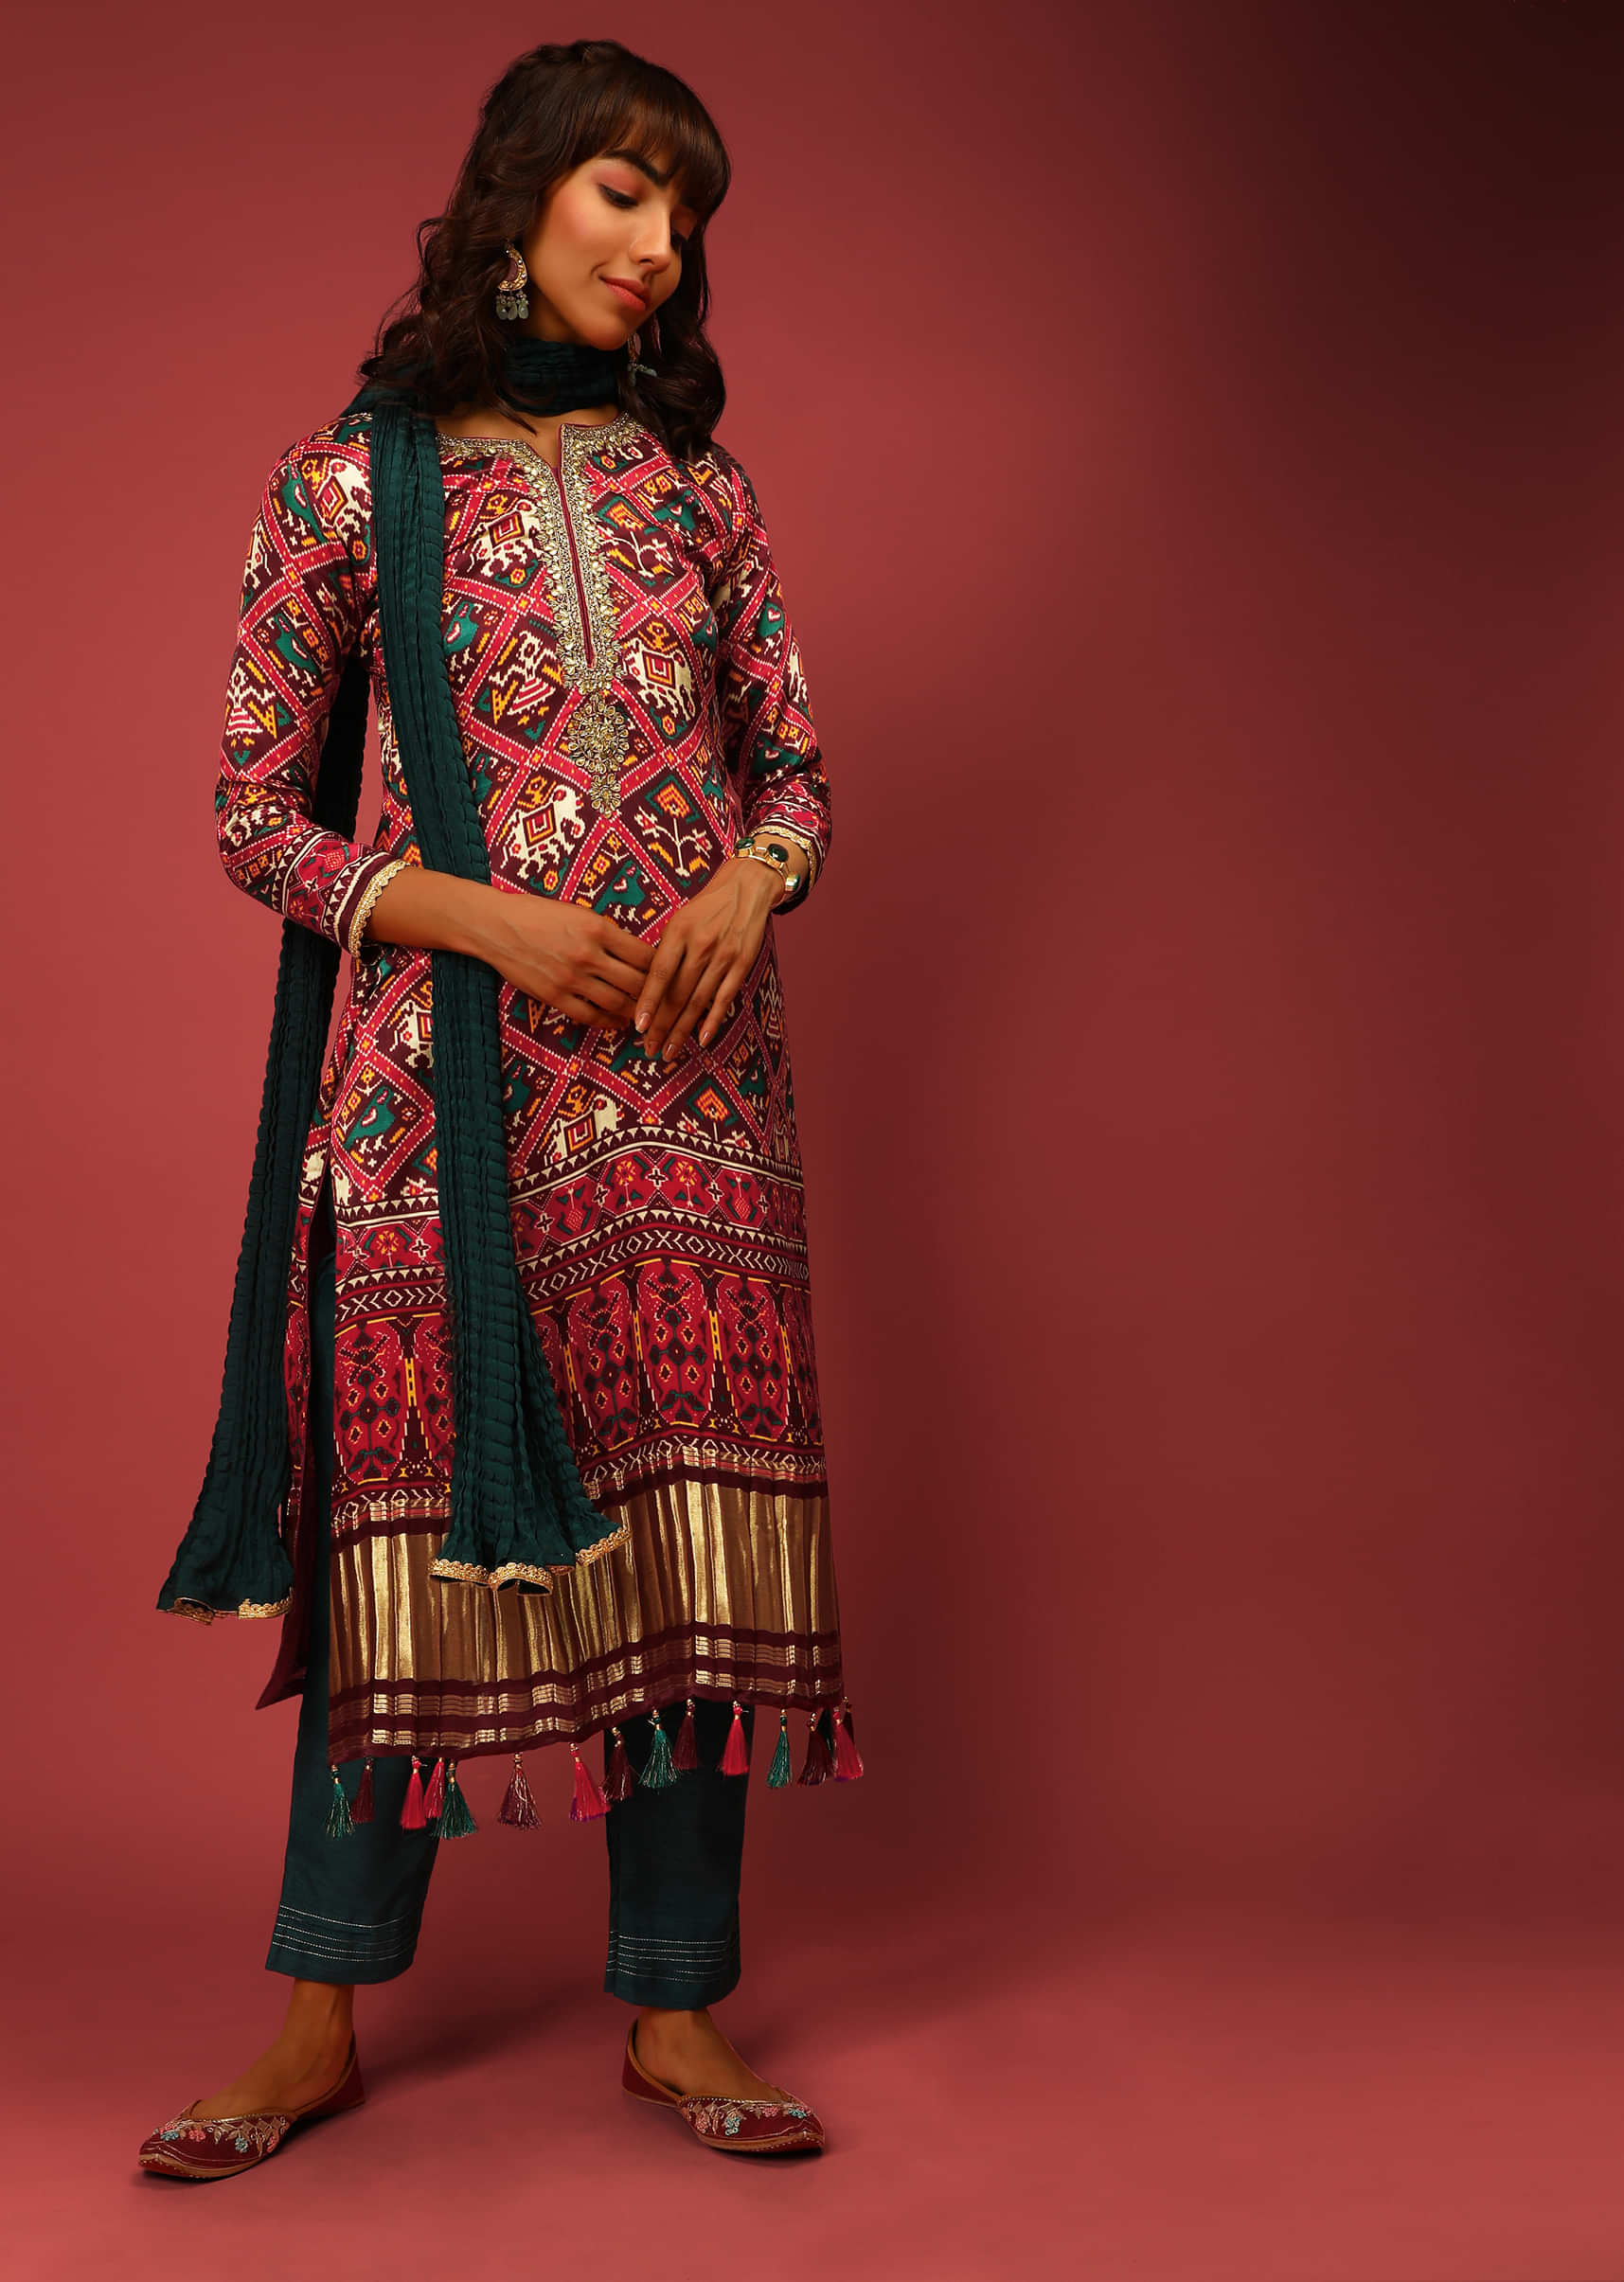 Maroon Straight Cut Suit In Satin Blend With Patola Print And Brocade Border Edged In Tassels  